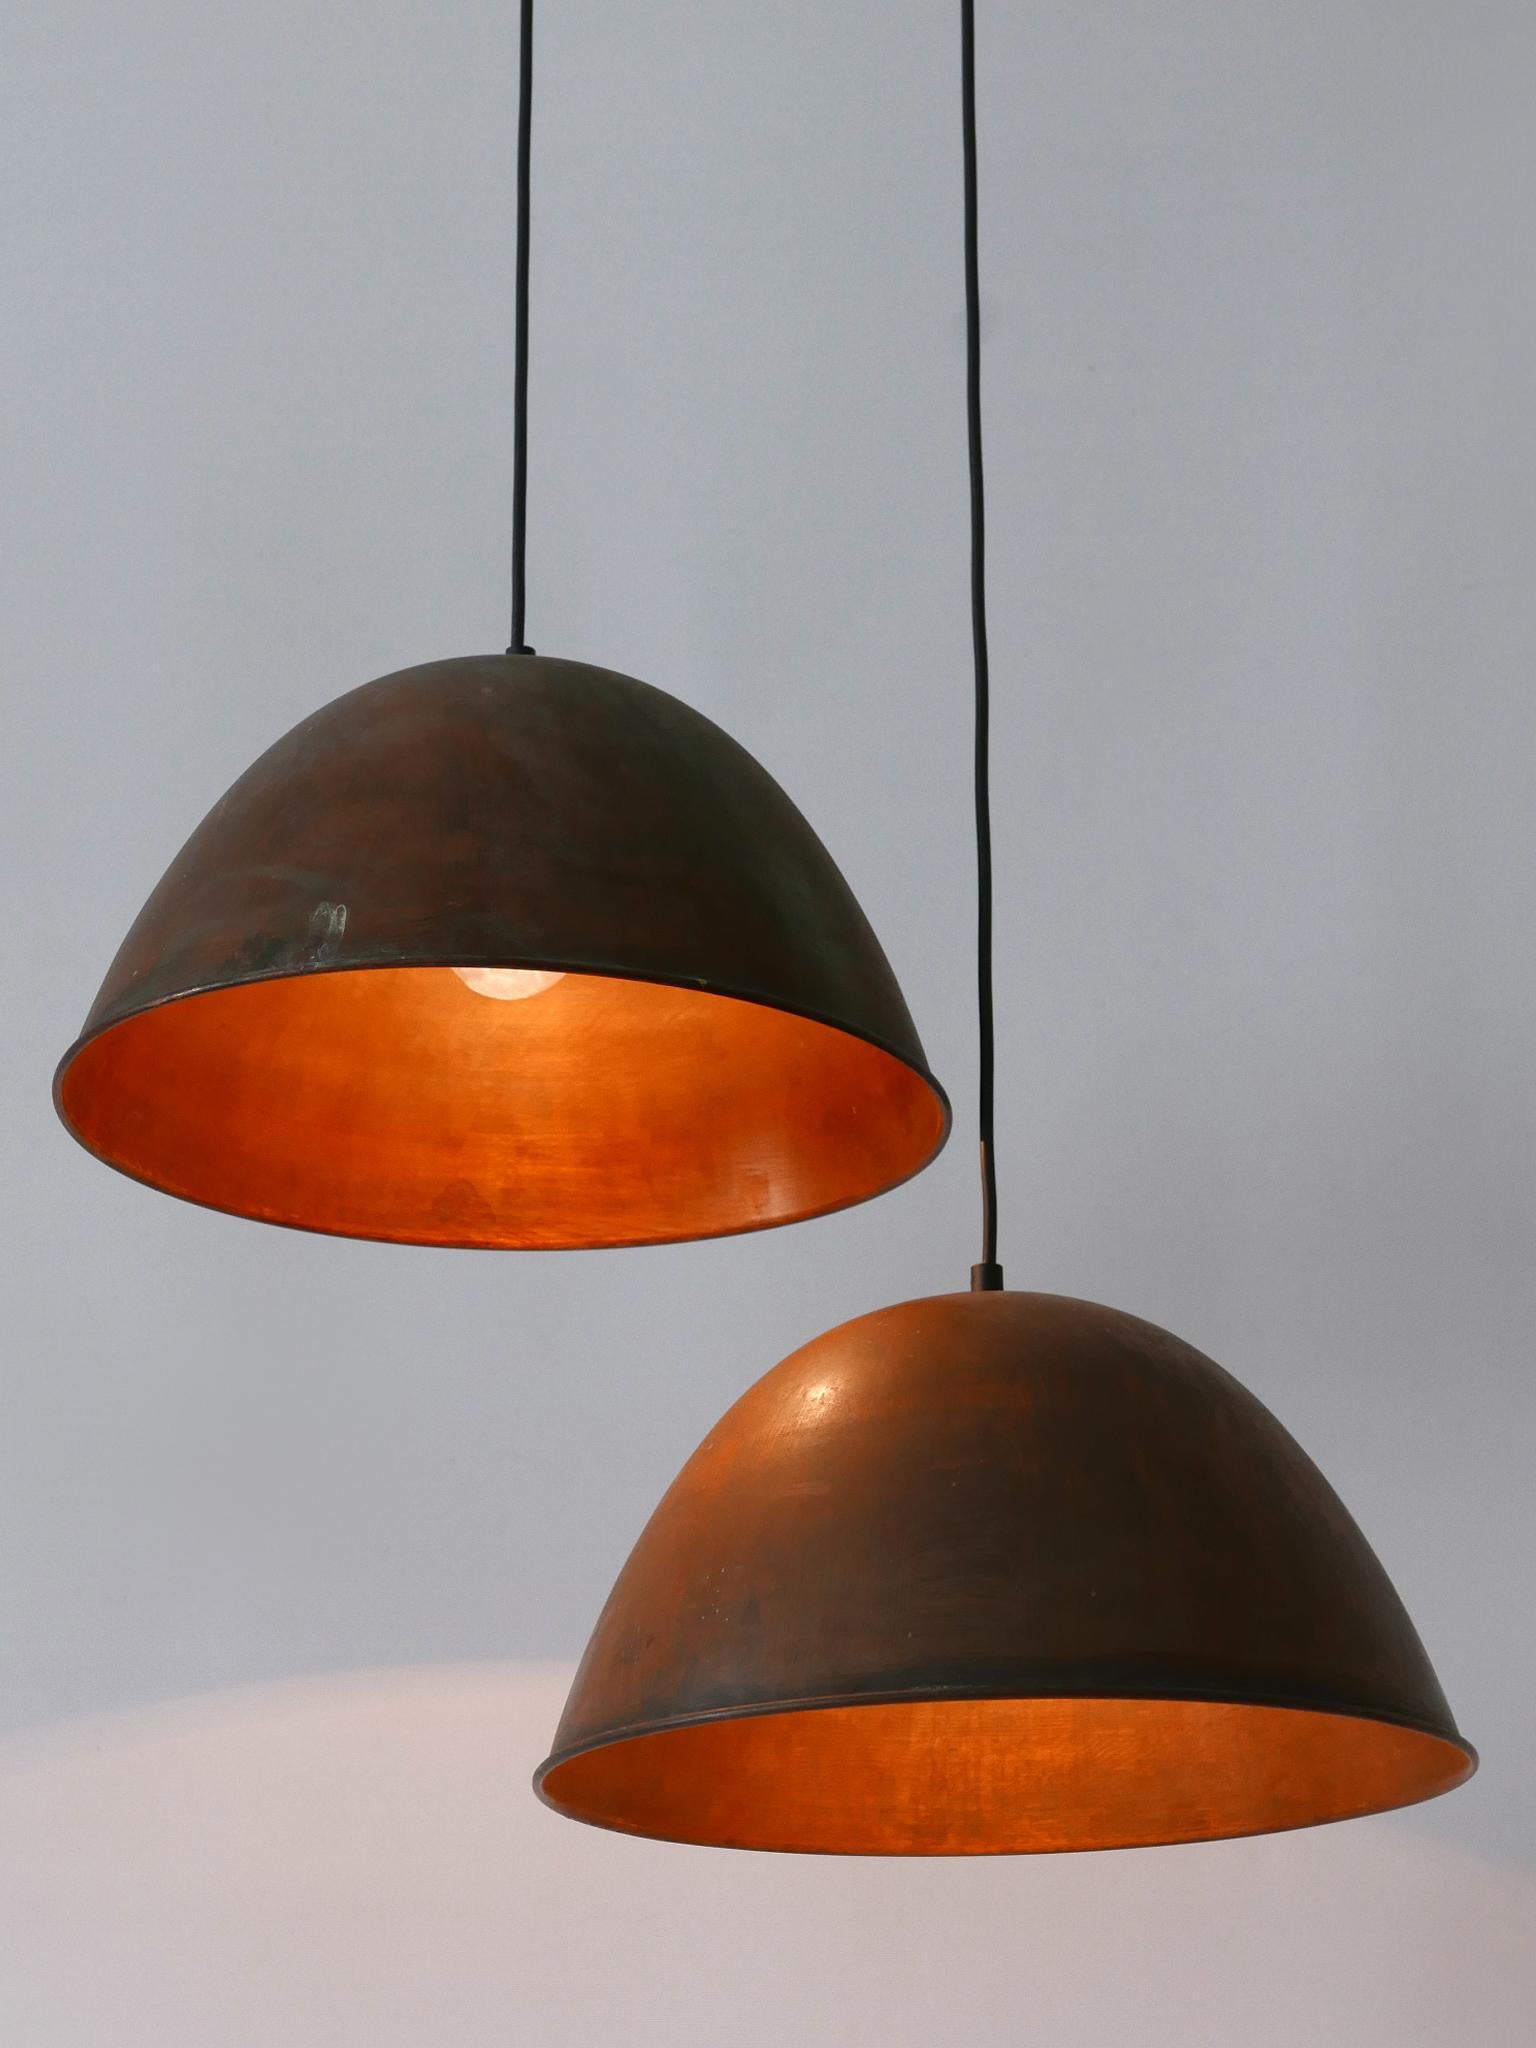 Set of Two Mid-Century Modern Copper Pendant Lamps or Hanging Lights 1950s For Sale 11